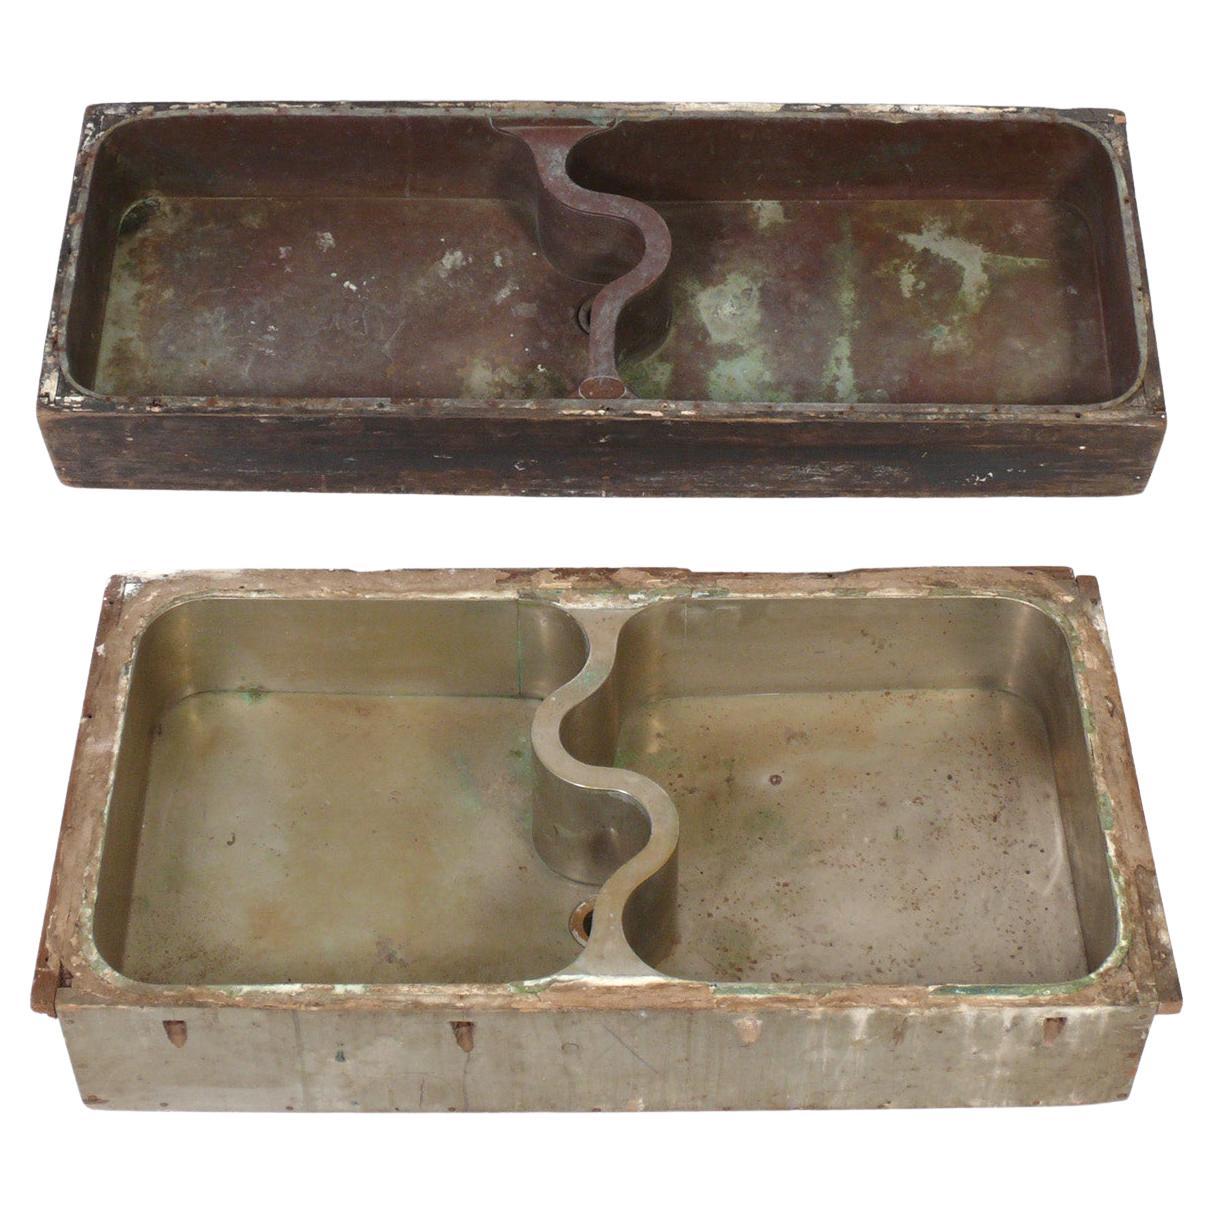 Selection of 1930s Industrial Art Deco Sinks Attributed to Donald Deskey